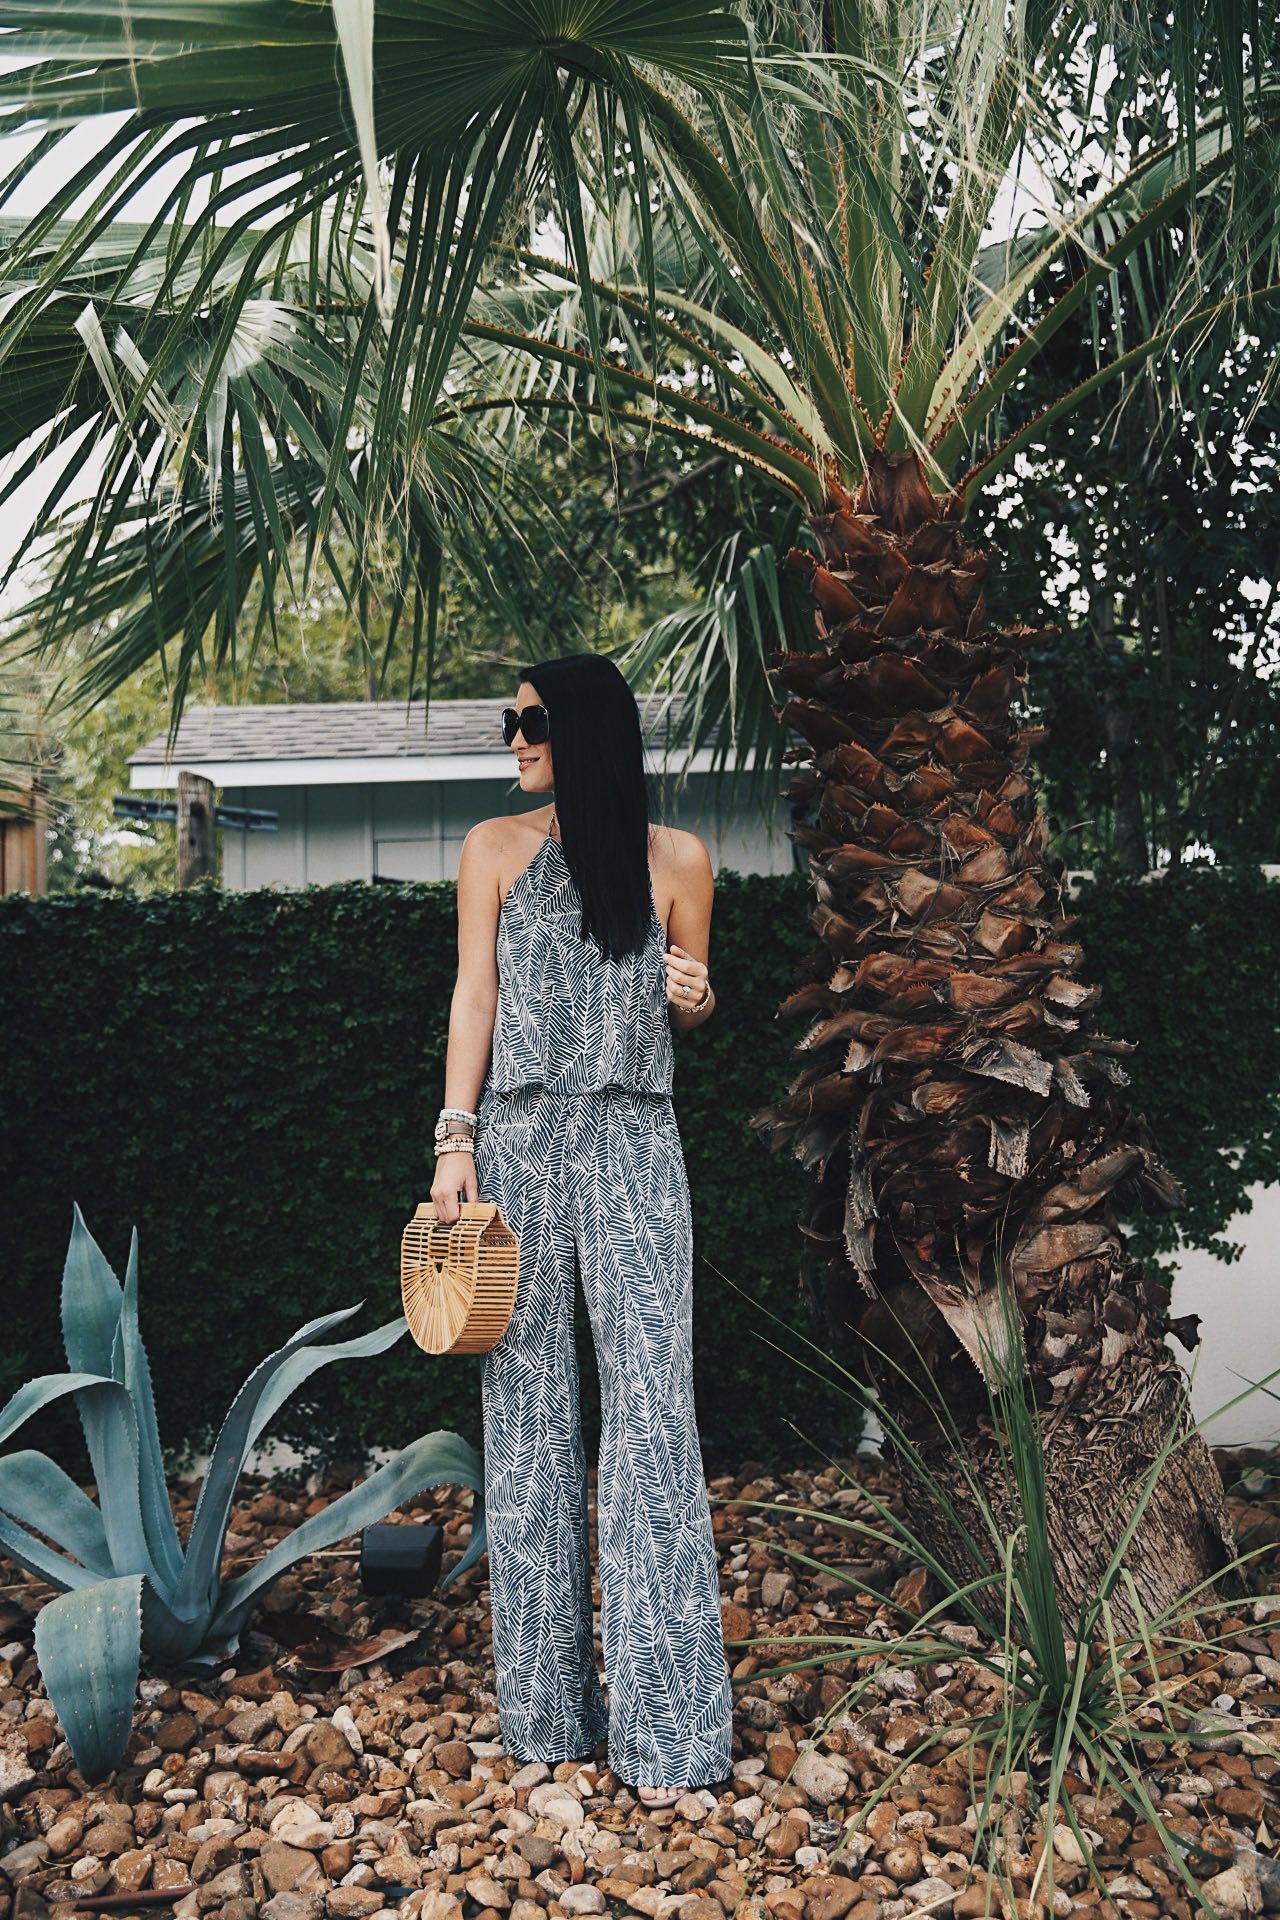 DTKAustin shares details on one of her go-to women's boutiques; Red Dress Boutique along with this beautiful palm print jumpsuit and Japanese bamboo bag. | how to style a jumpsuit | how to wear a jumpsuit | fall fashion tips | fall outfit ideas | fall style tips | what to wear for fall | cool weather fashion | fashion for fall | style tips for fall | outfit ideas for fall || Dressed to Kill